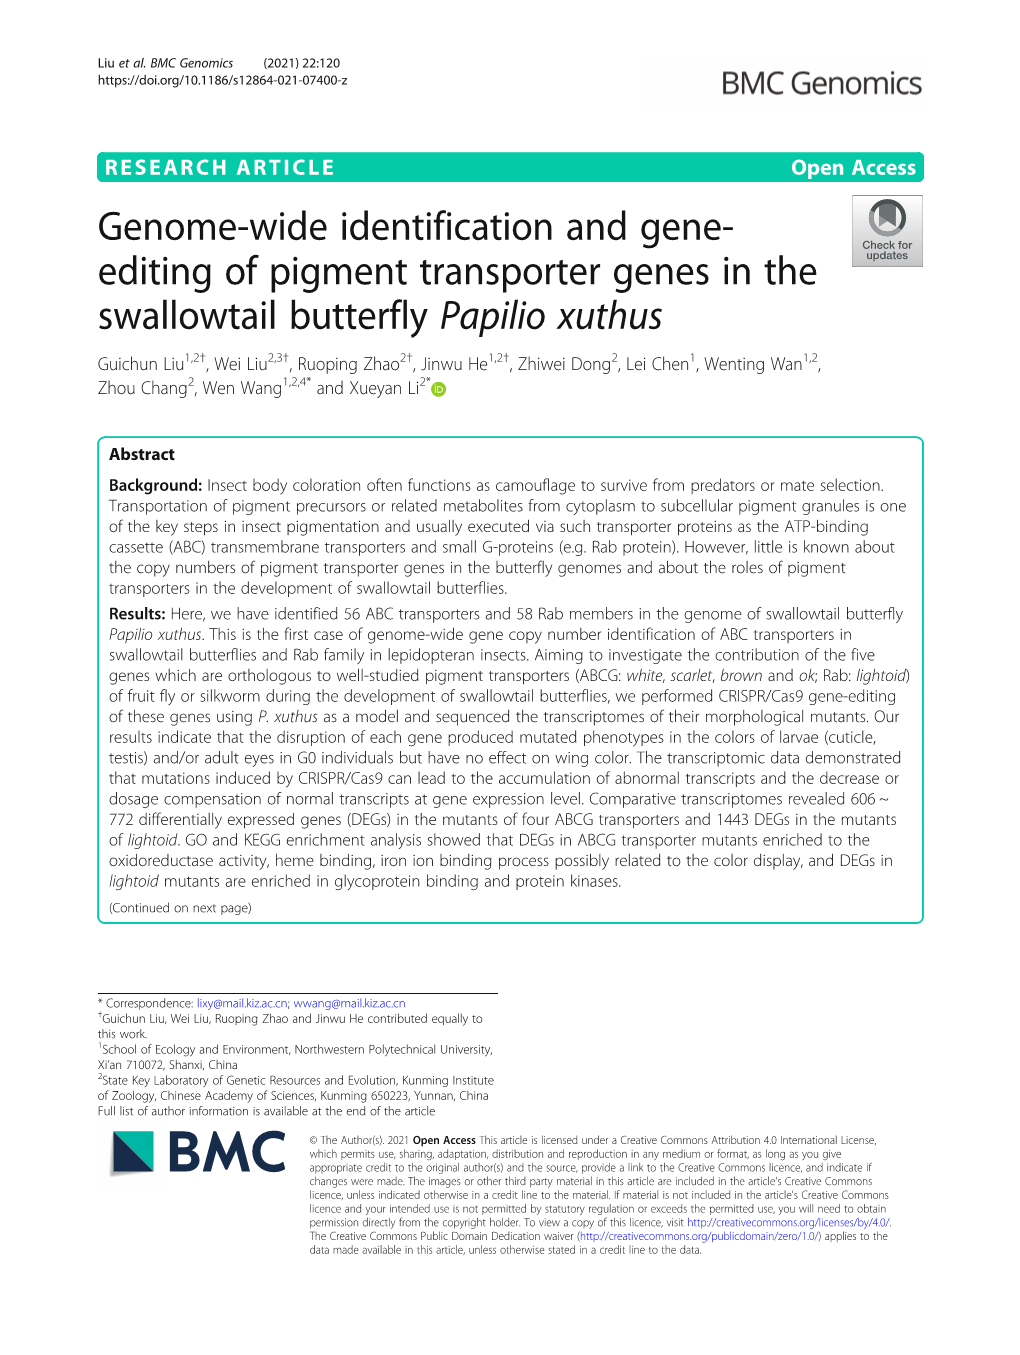 Genome-Wide Identification and Gene-Editing of Pigment Transporter